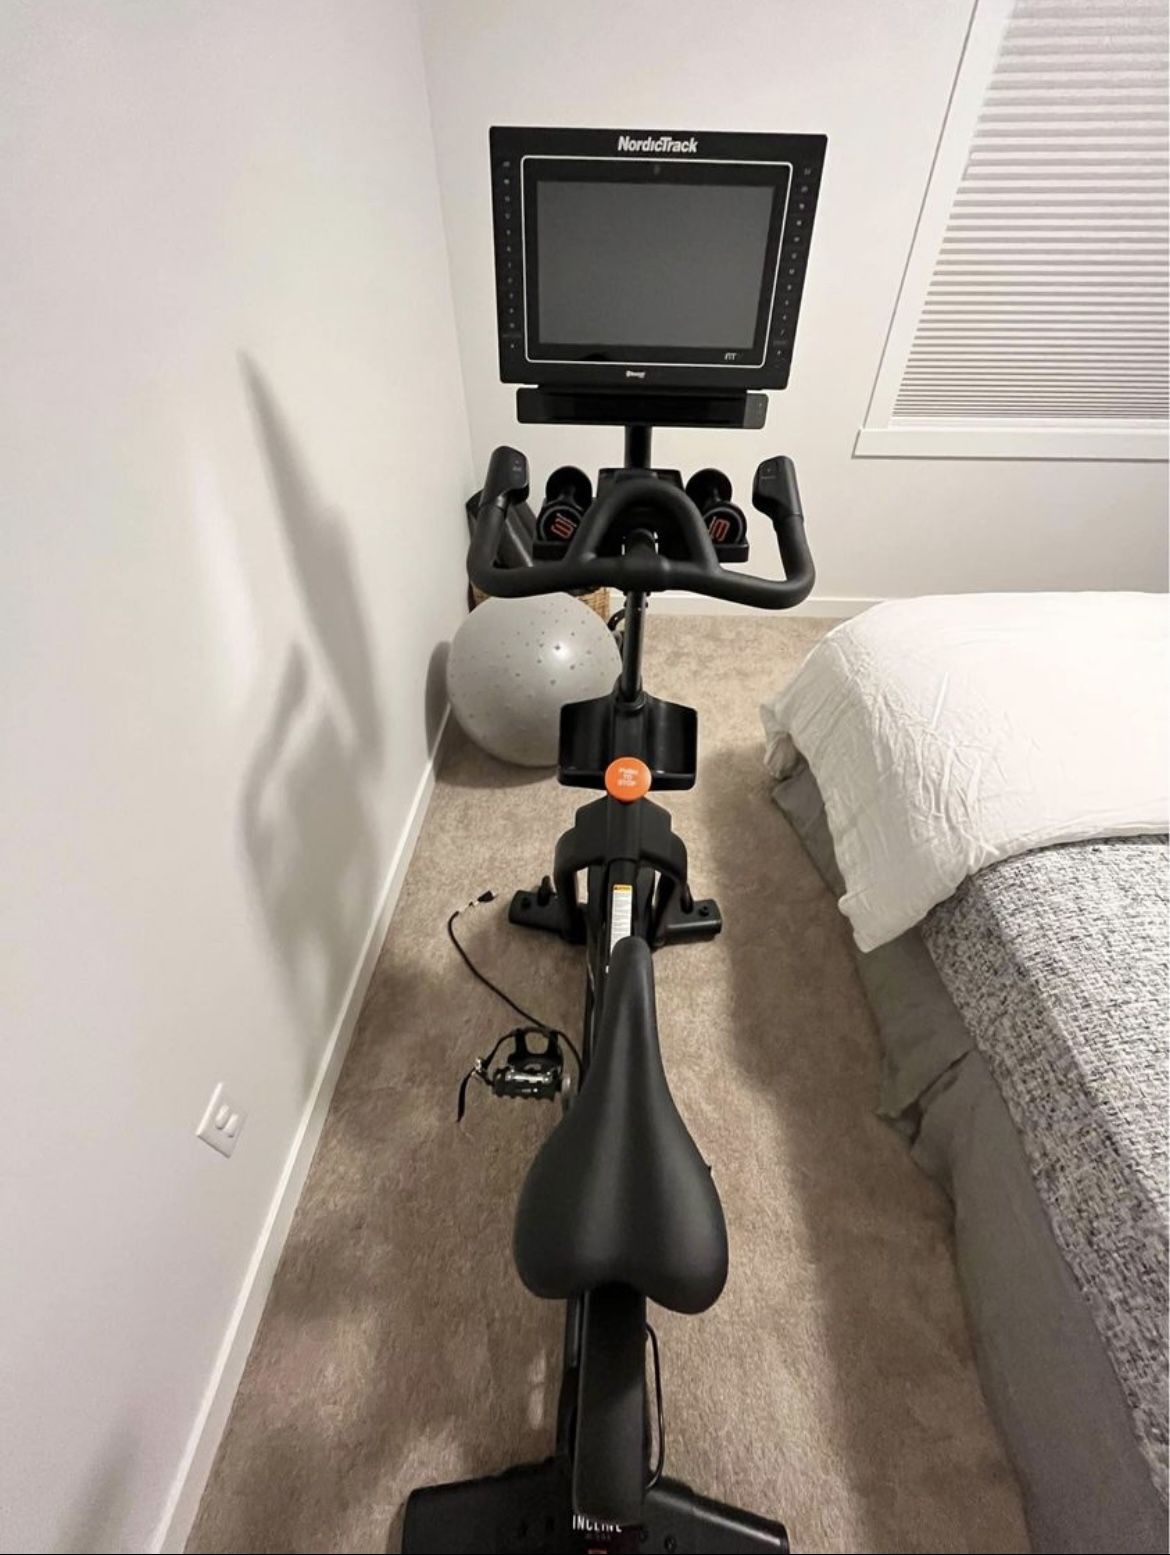 NordicTrack Exercise bike, New